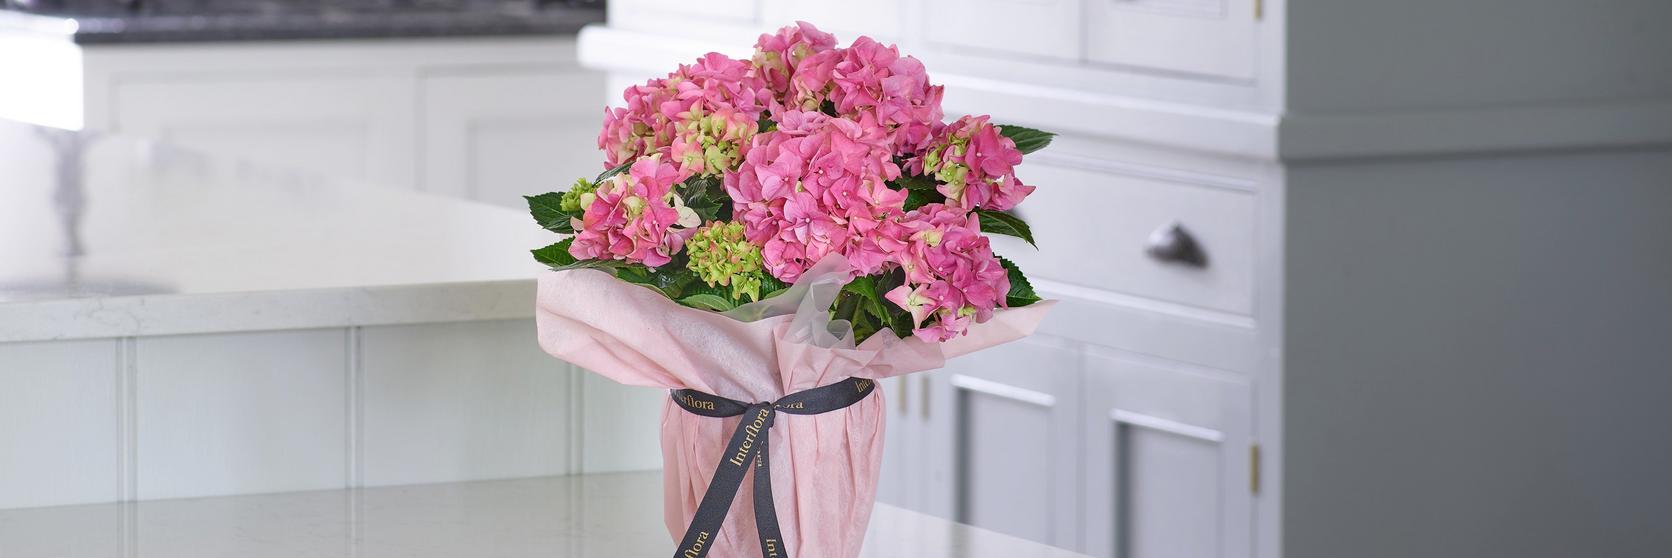 Interflora-plant-pink-gift-wrapped